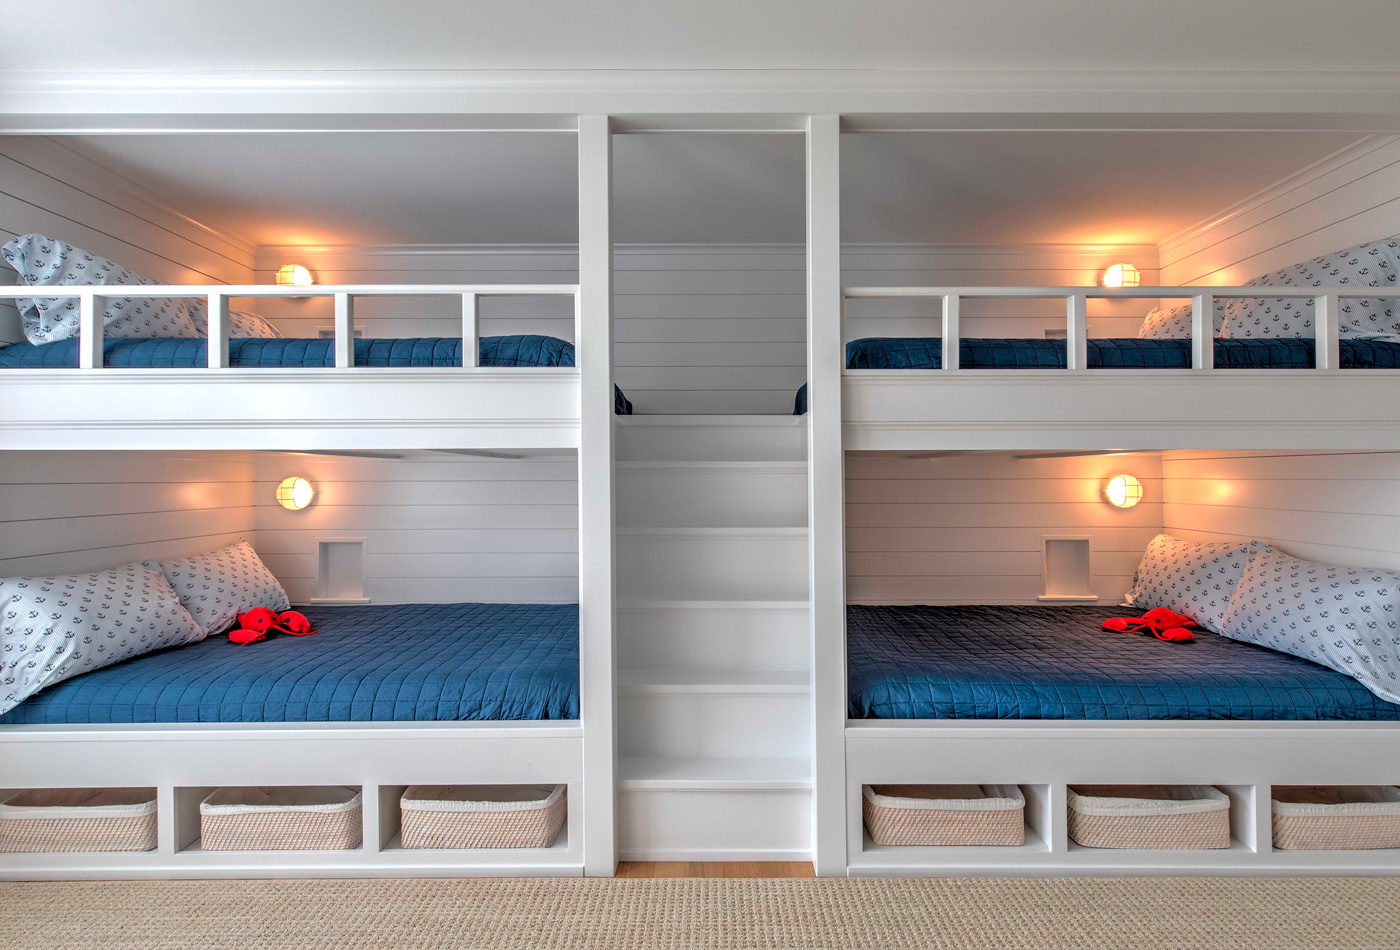 All In The Details Boston Design Guide, Handmade Bunk Beds